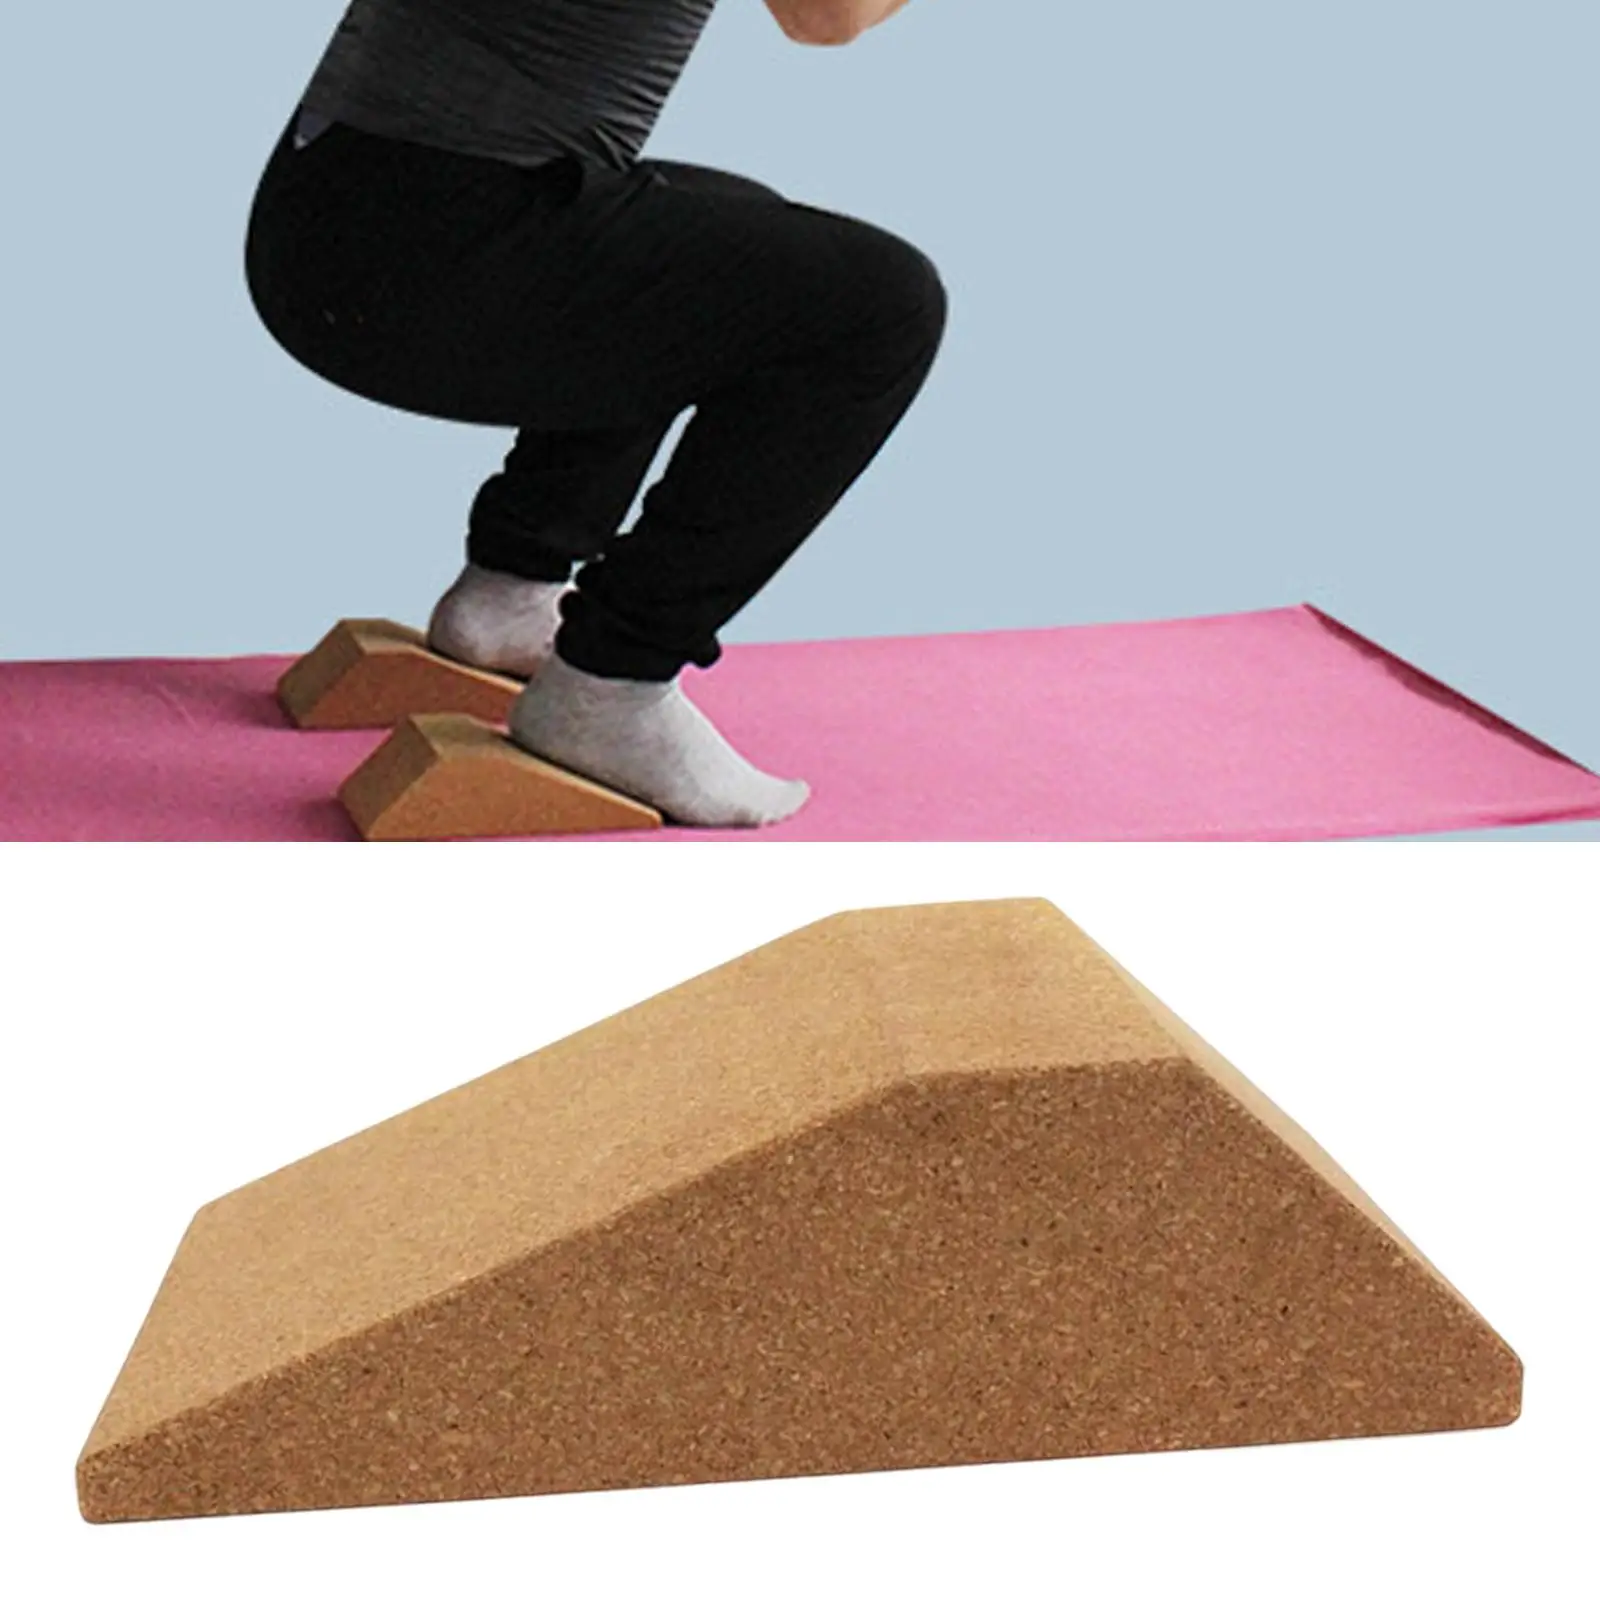 

Cork Squat Wedge Yoga Block Incline Board Lightweight Exercise Brick Non Slip for Yoga Weightlifting Home Stretching Fitness